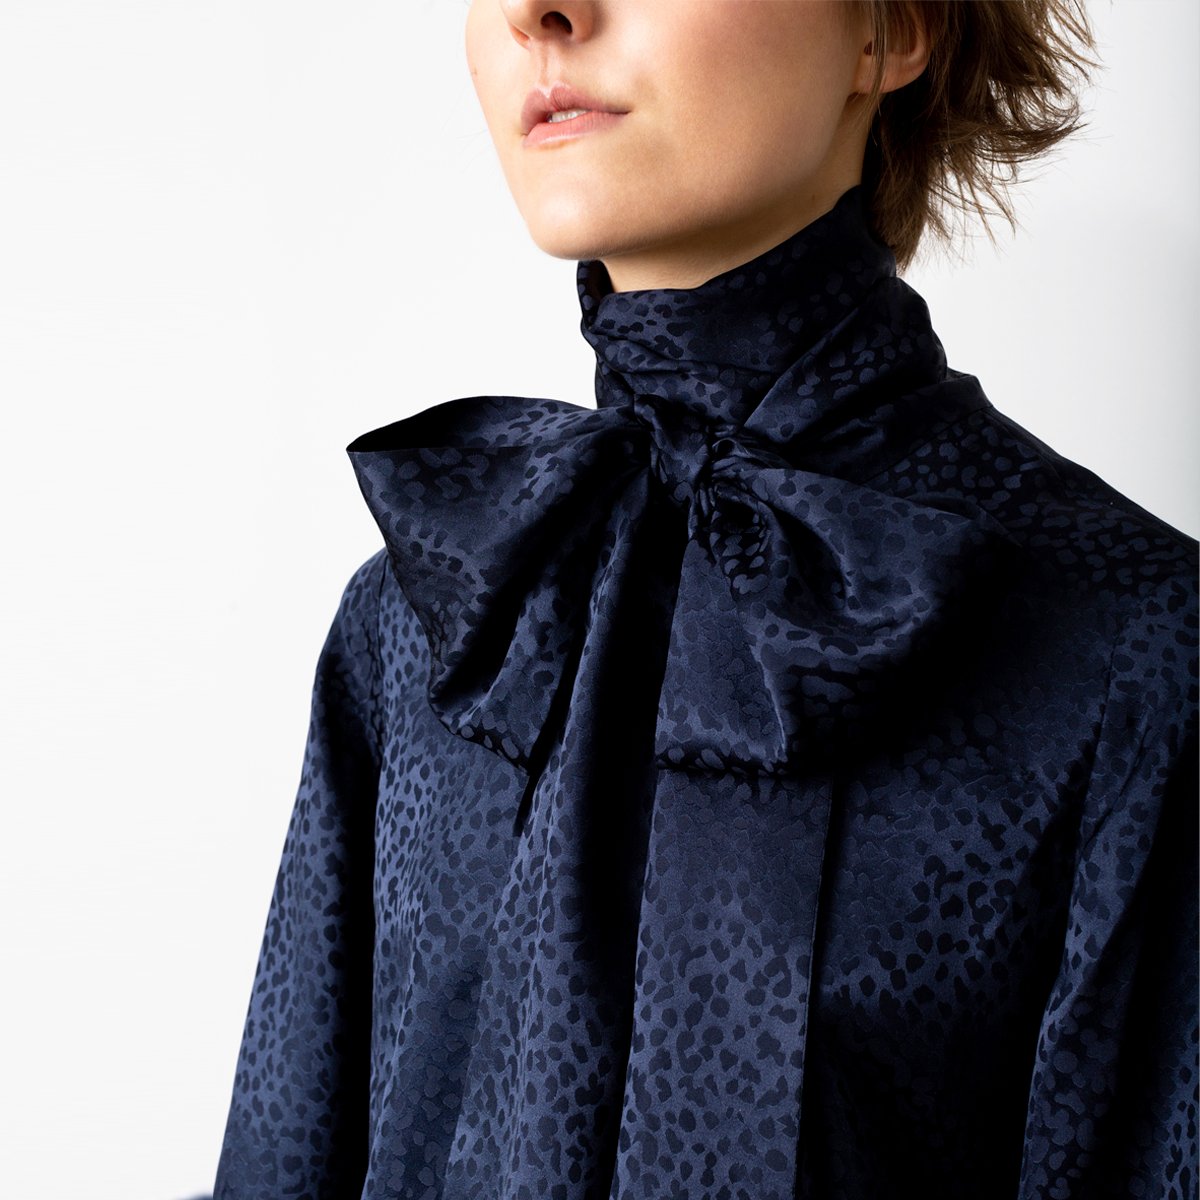 Bow tie blouse navy in limited edition silk jaquard - Studio Heijne